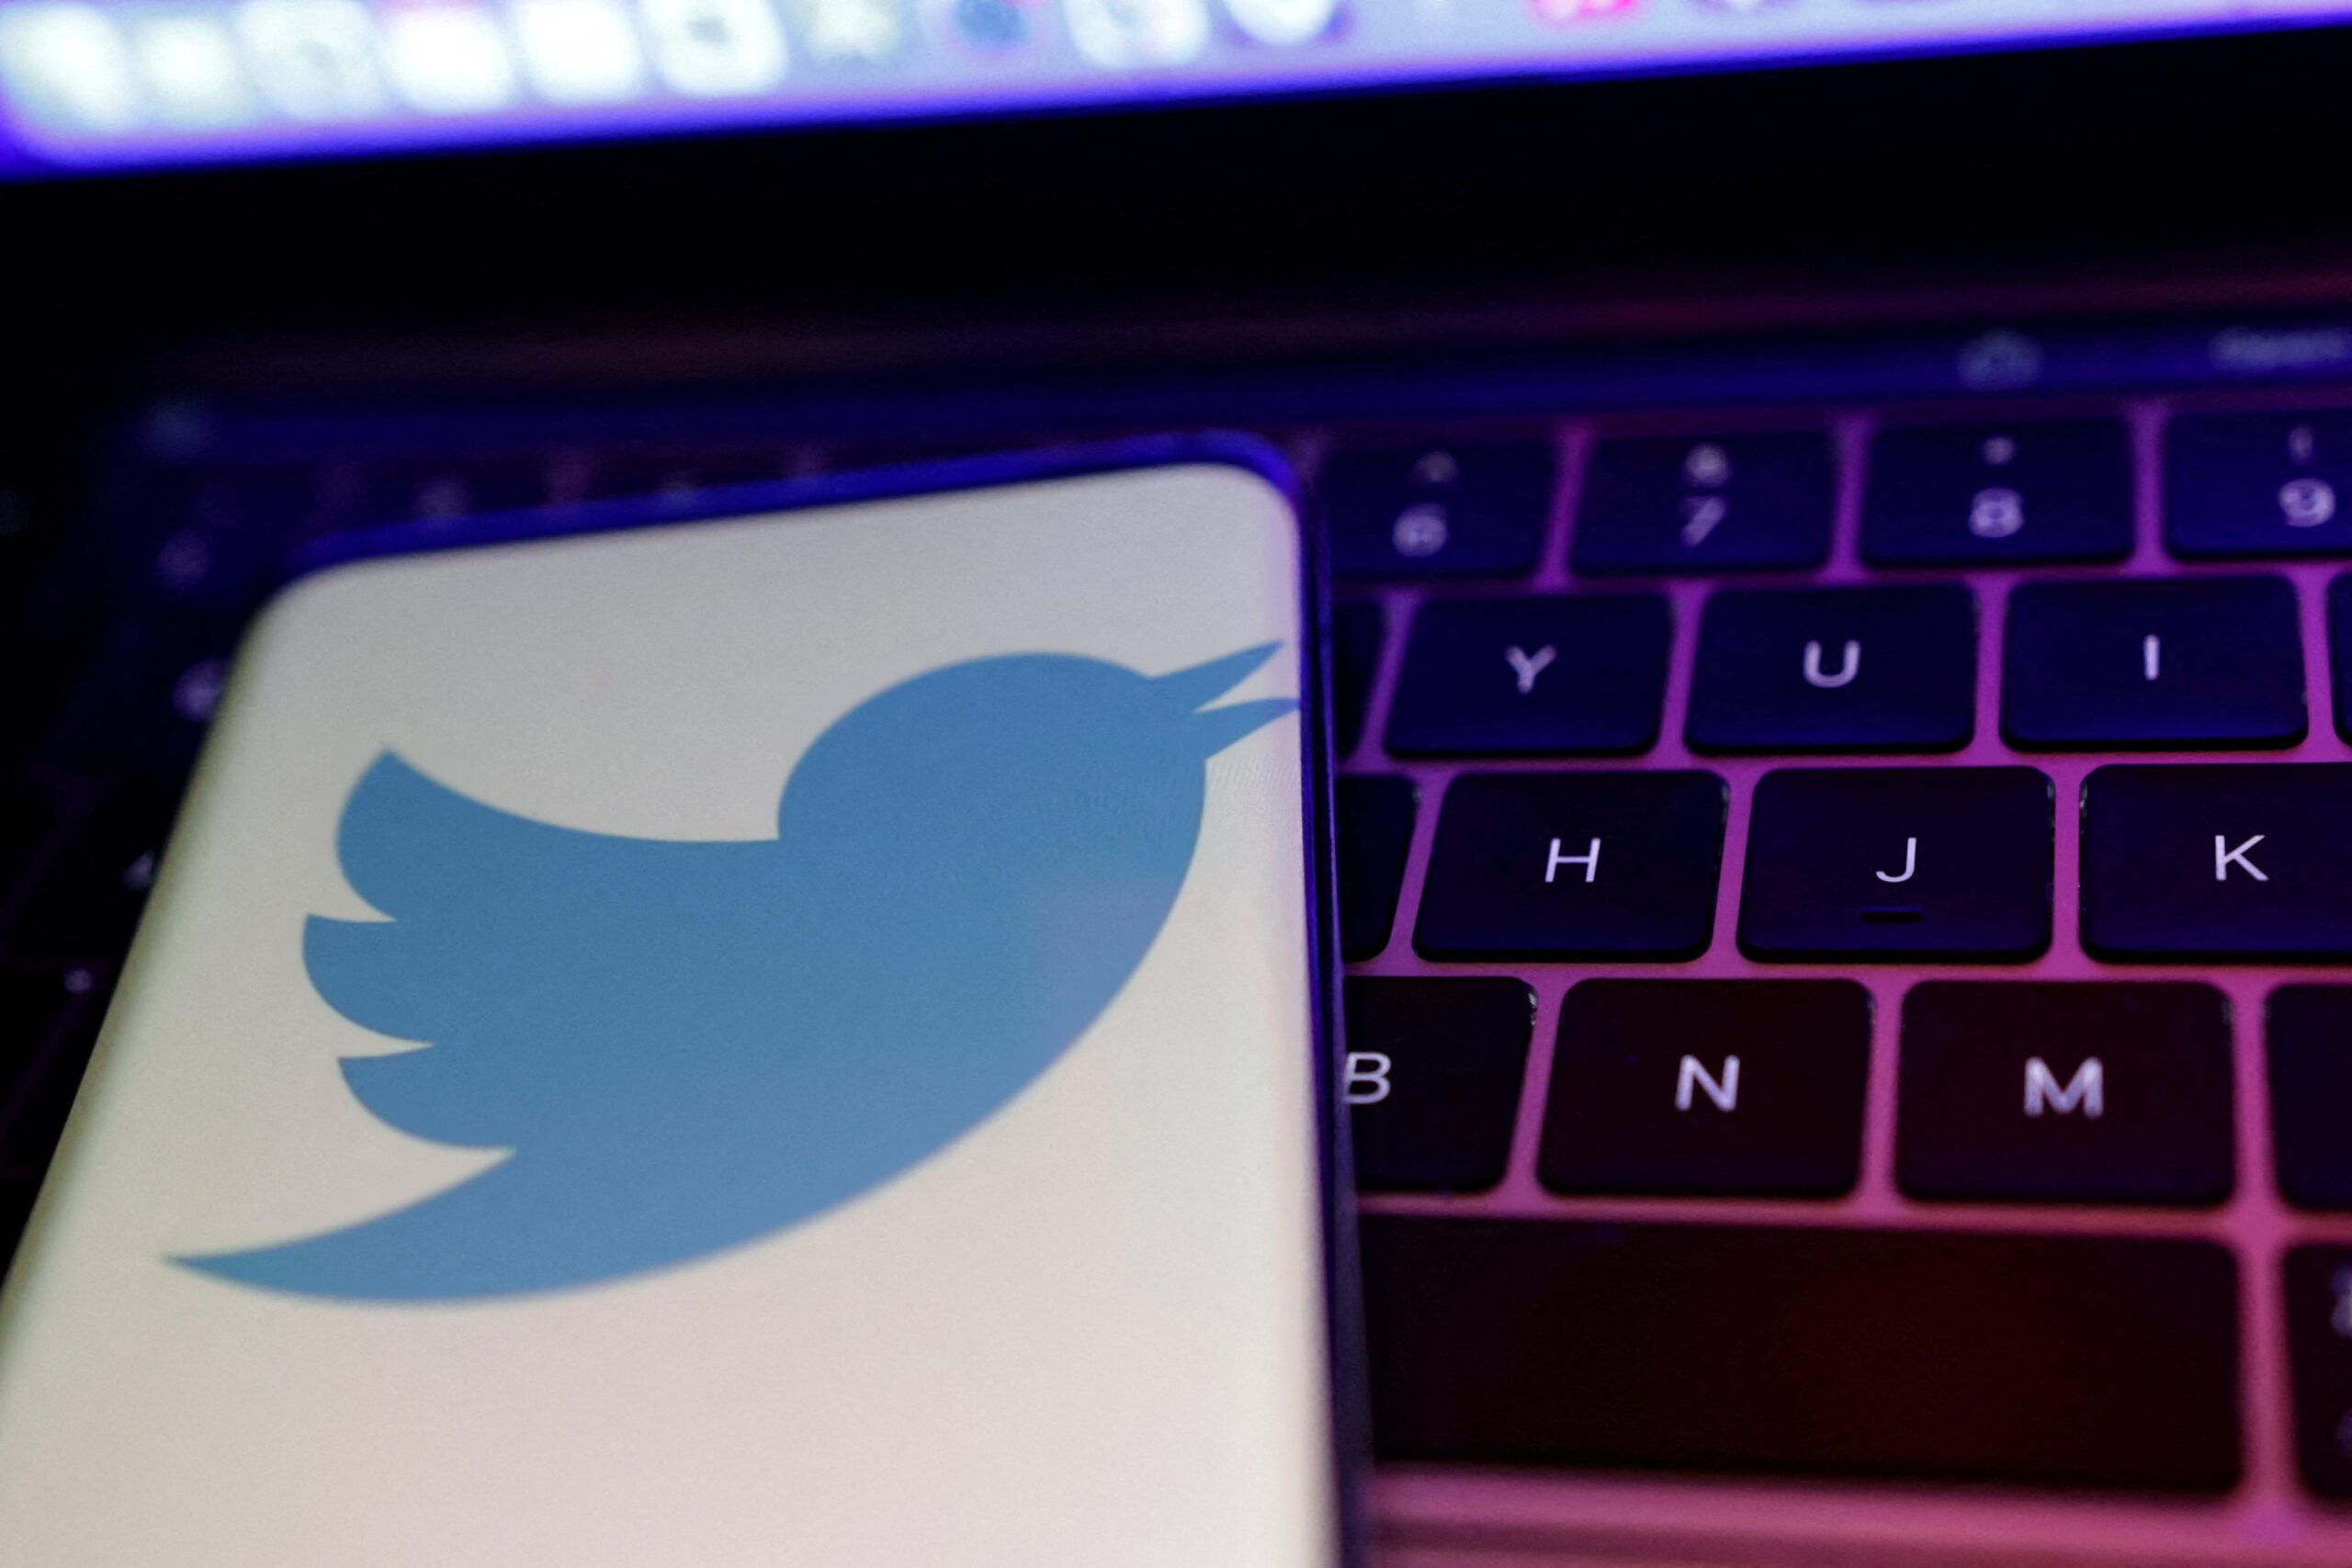 Twitter exec says it’s moving fast on moderation as harmful content surges